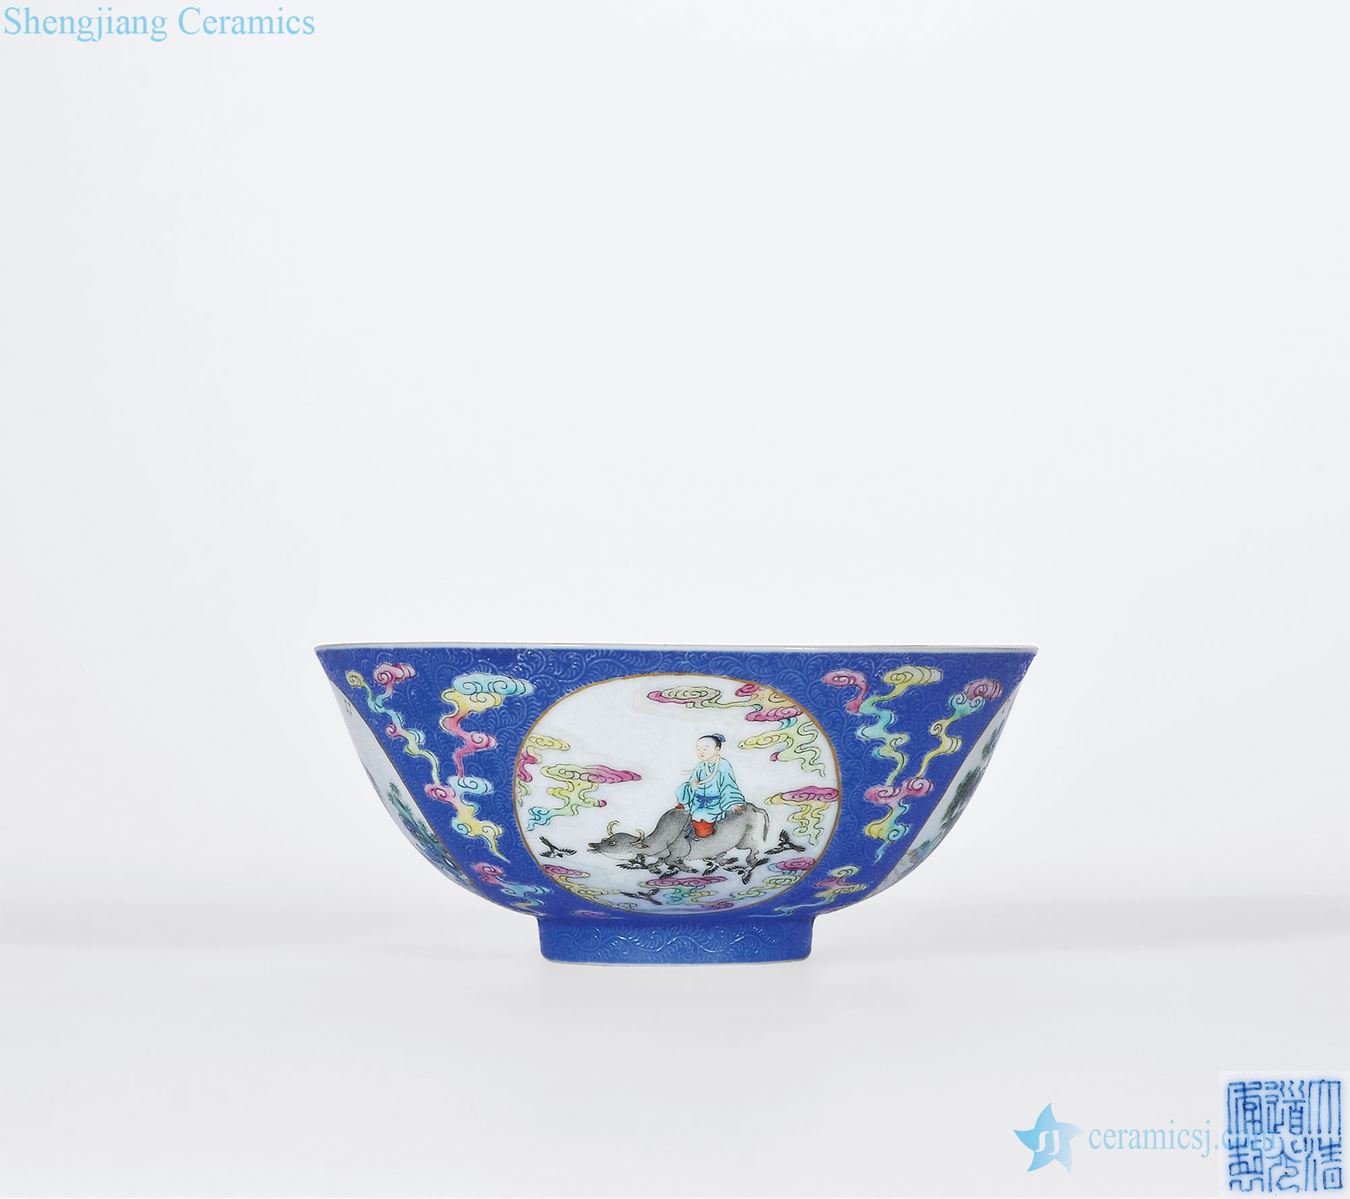 Clear light blue ground rolling way pastel blue outside inside medallion, vega tianhe green-splashed bowls with the fairy characters